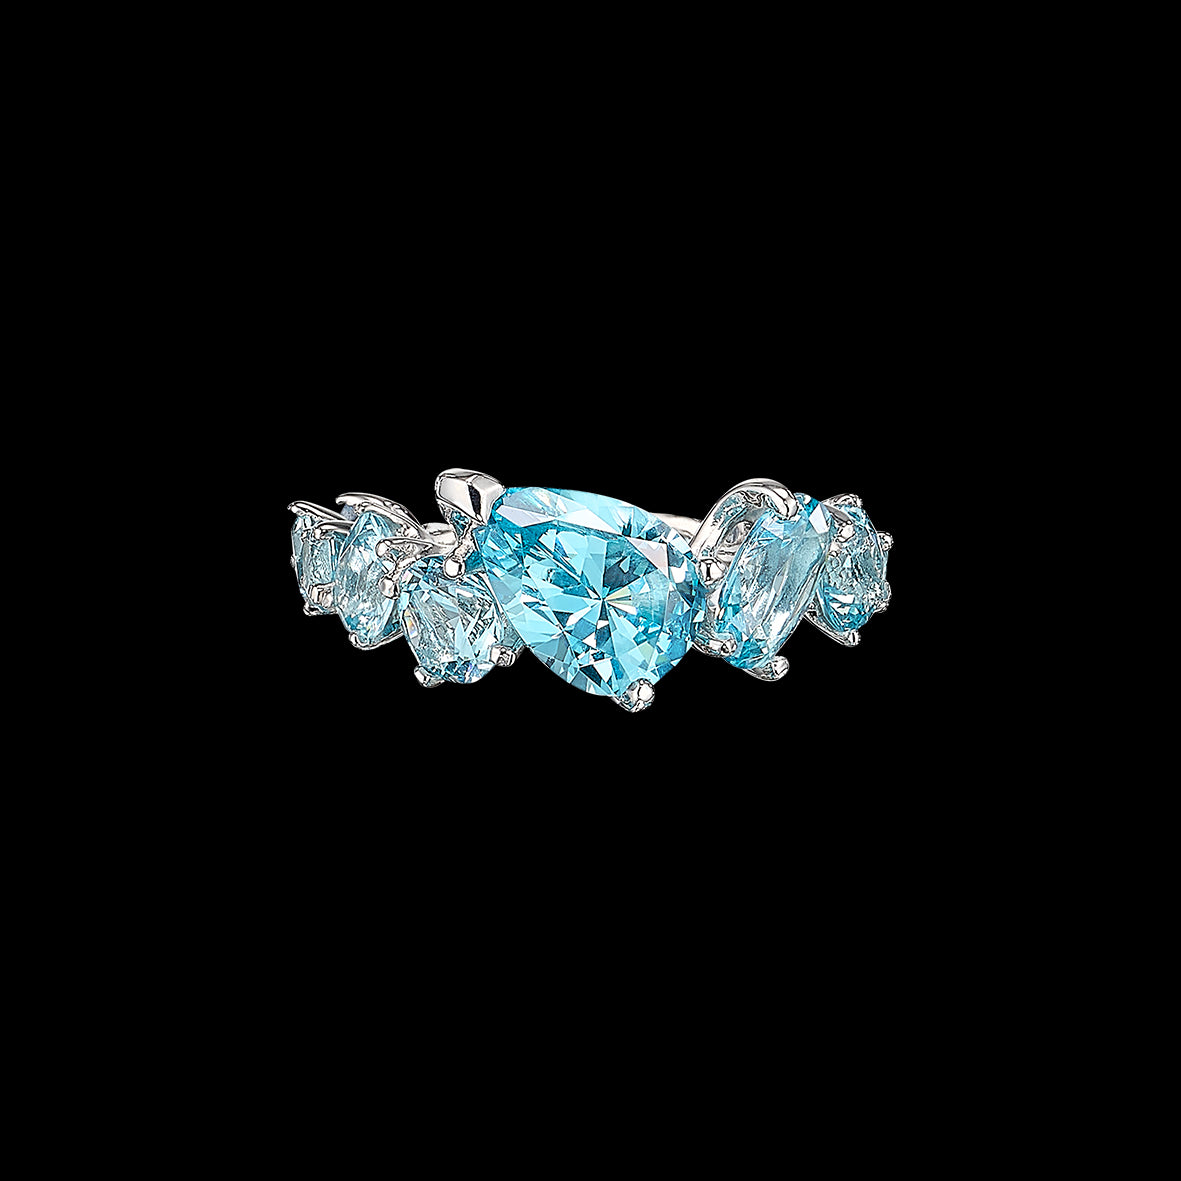 Baby Blue Nova Starburst Ring, Ring, Anabela Chan Joaillerie - Fine jewelry with laboratory grown and created gemstones hand-crafted in the United Kingdom. Anabela Chan Joaillerie is the first fine jewellery brand in the world to champion laboratory-grown and created gemstones with high jewellery design, artisanal craftsmanship and a focus on ethical and sustainable innovations.